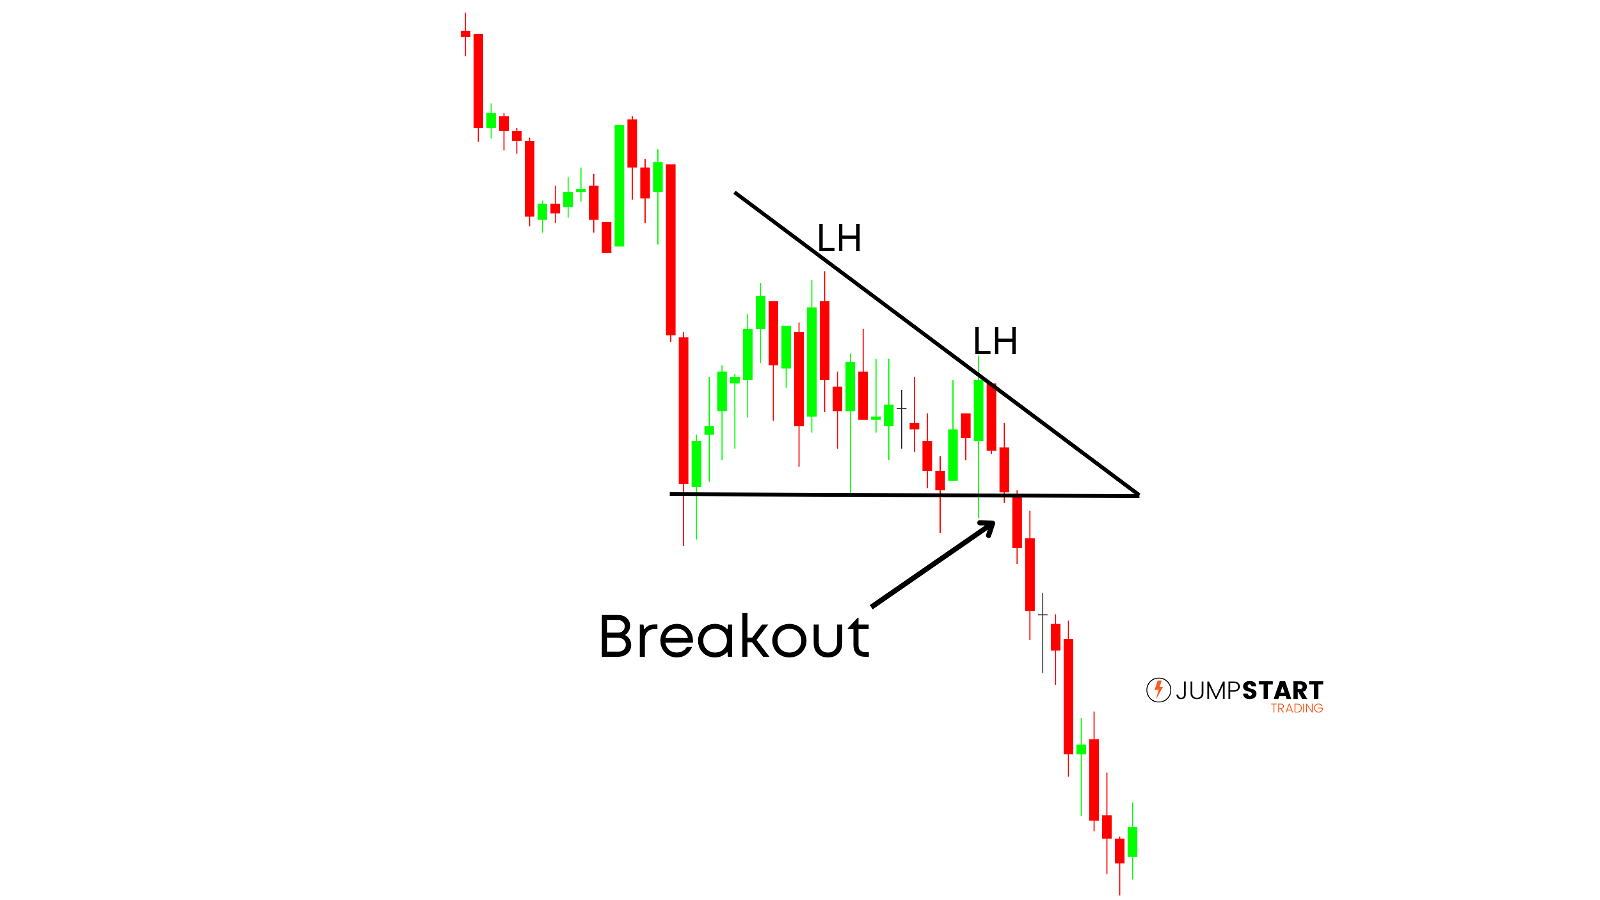 Price consolidating into a descending triangle then breaking out to the downside